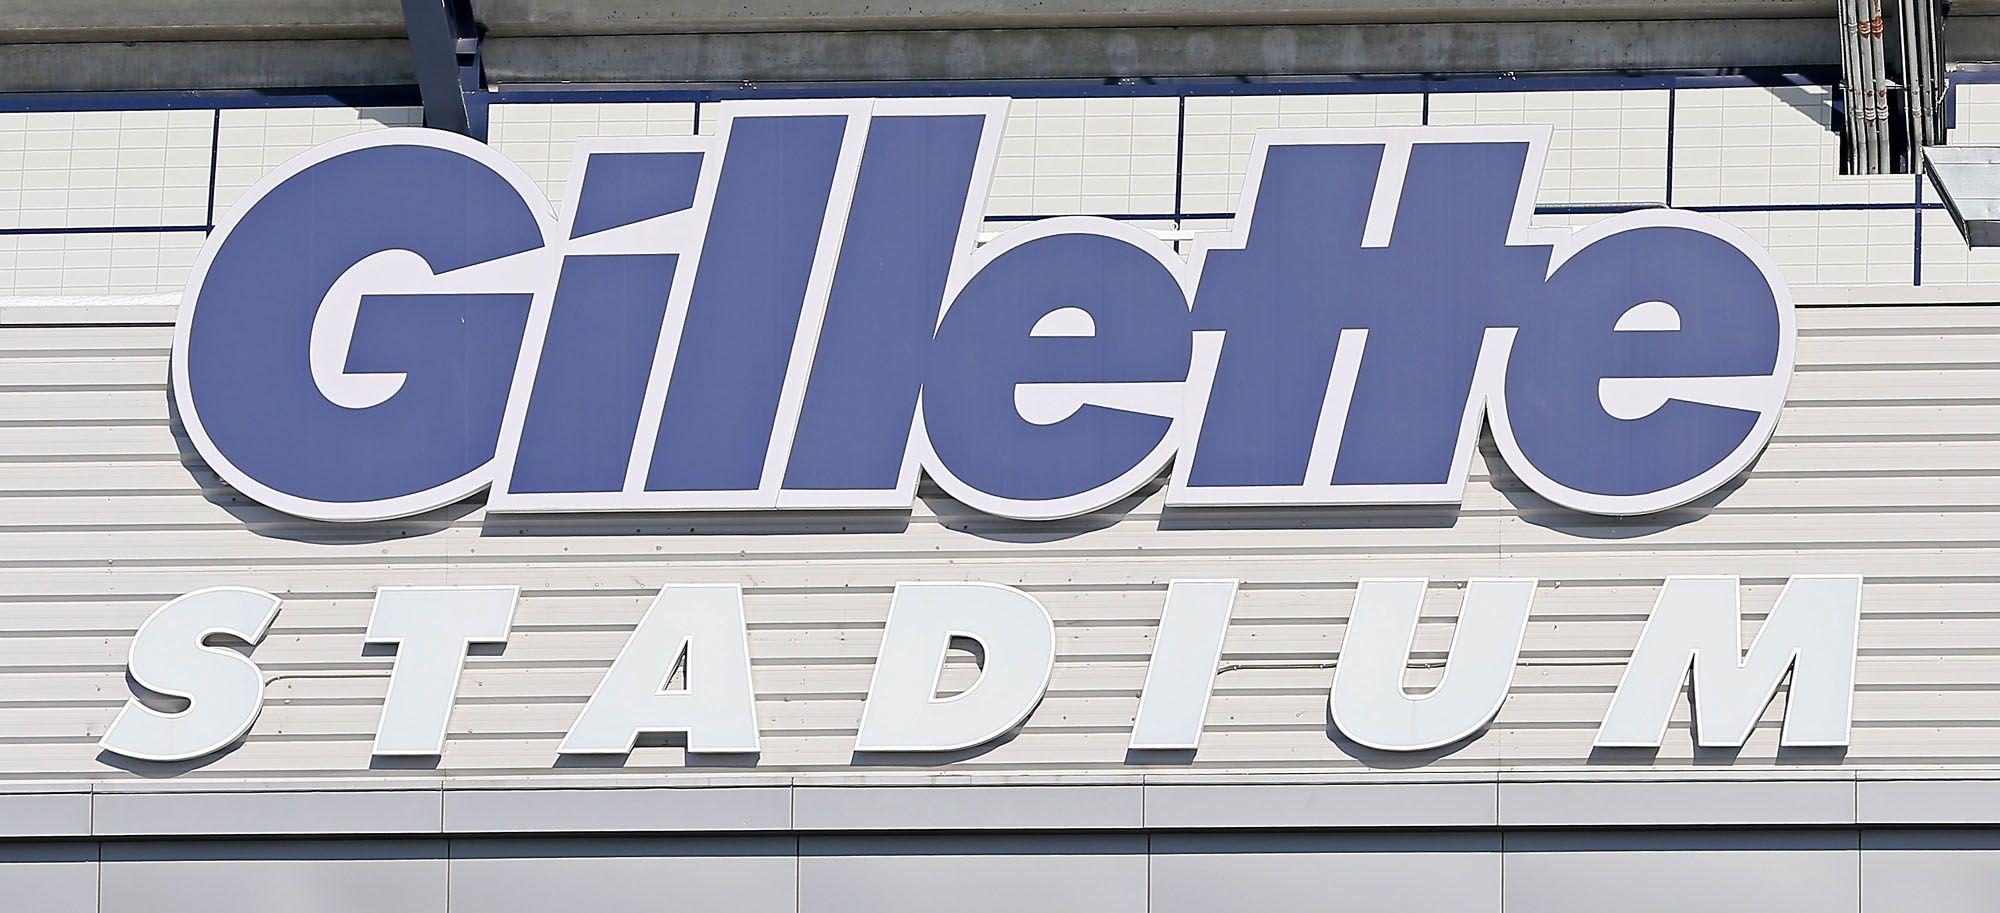 Bostonherald.com Logo - Following Robert Kraft charges, petition calls for Gillette to drop ...